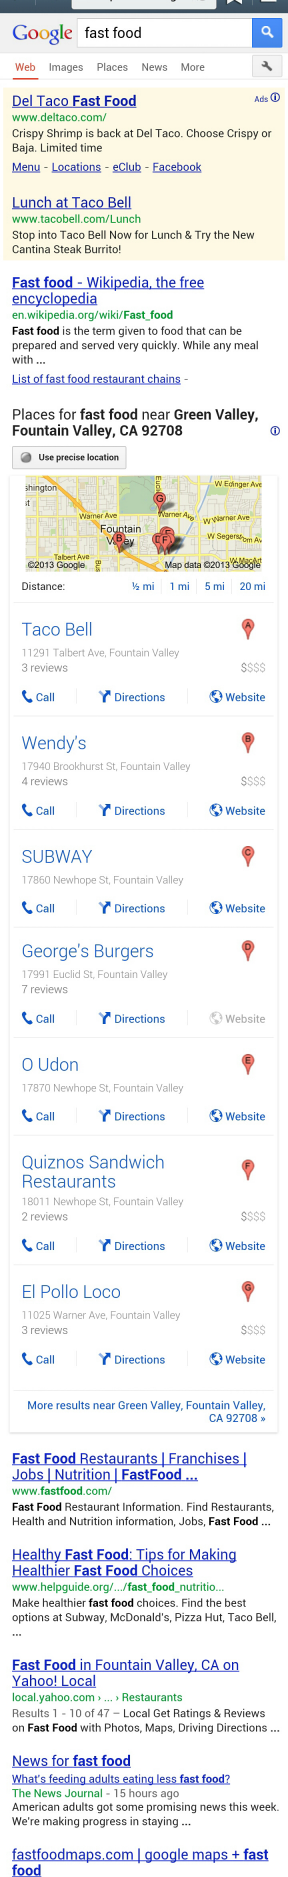 Android Mobile SERP Fast Food